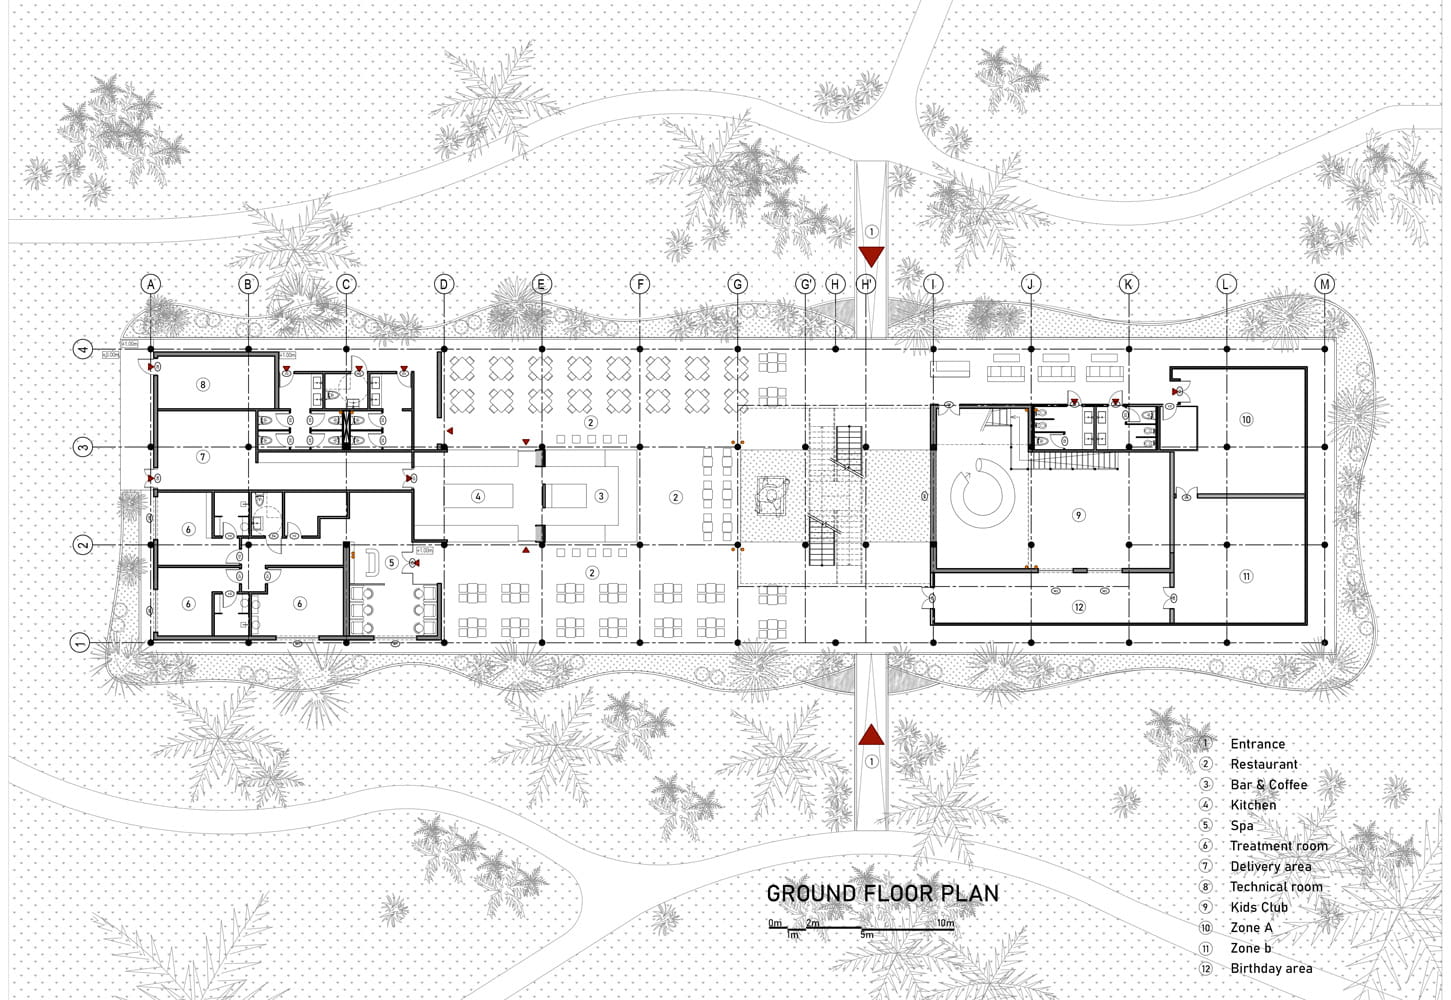 Coconut Club floor plan in Phnom Penh by T3 Architects